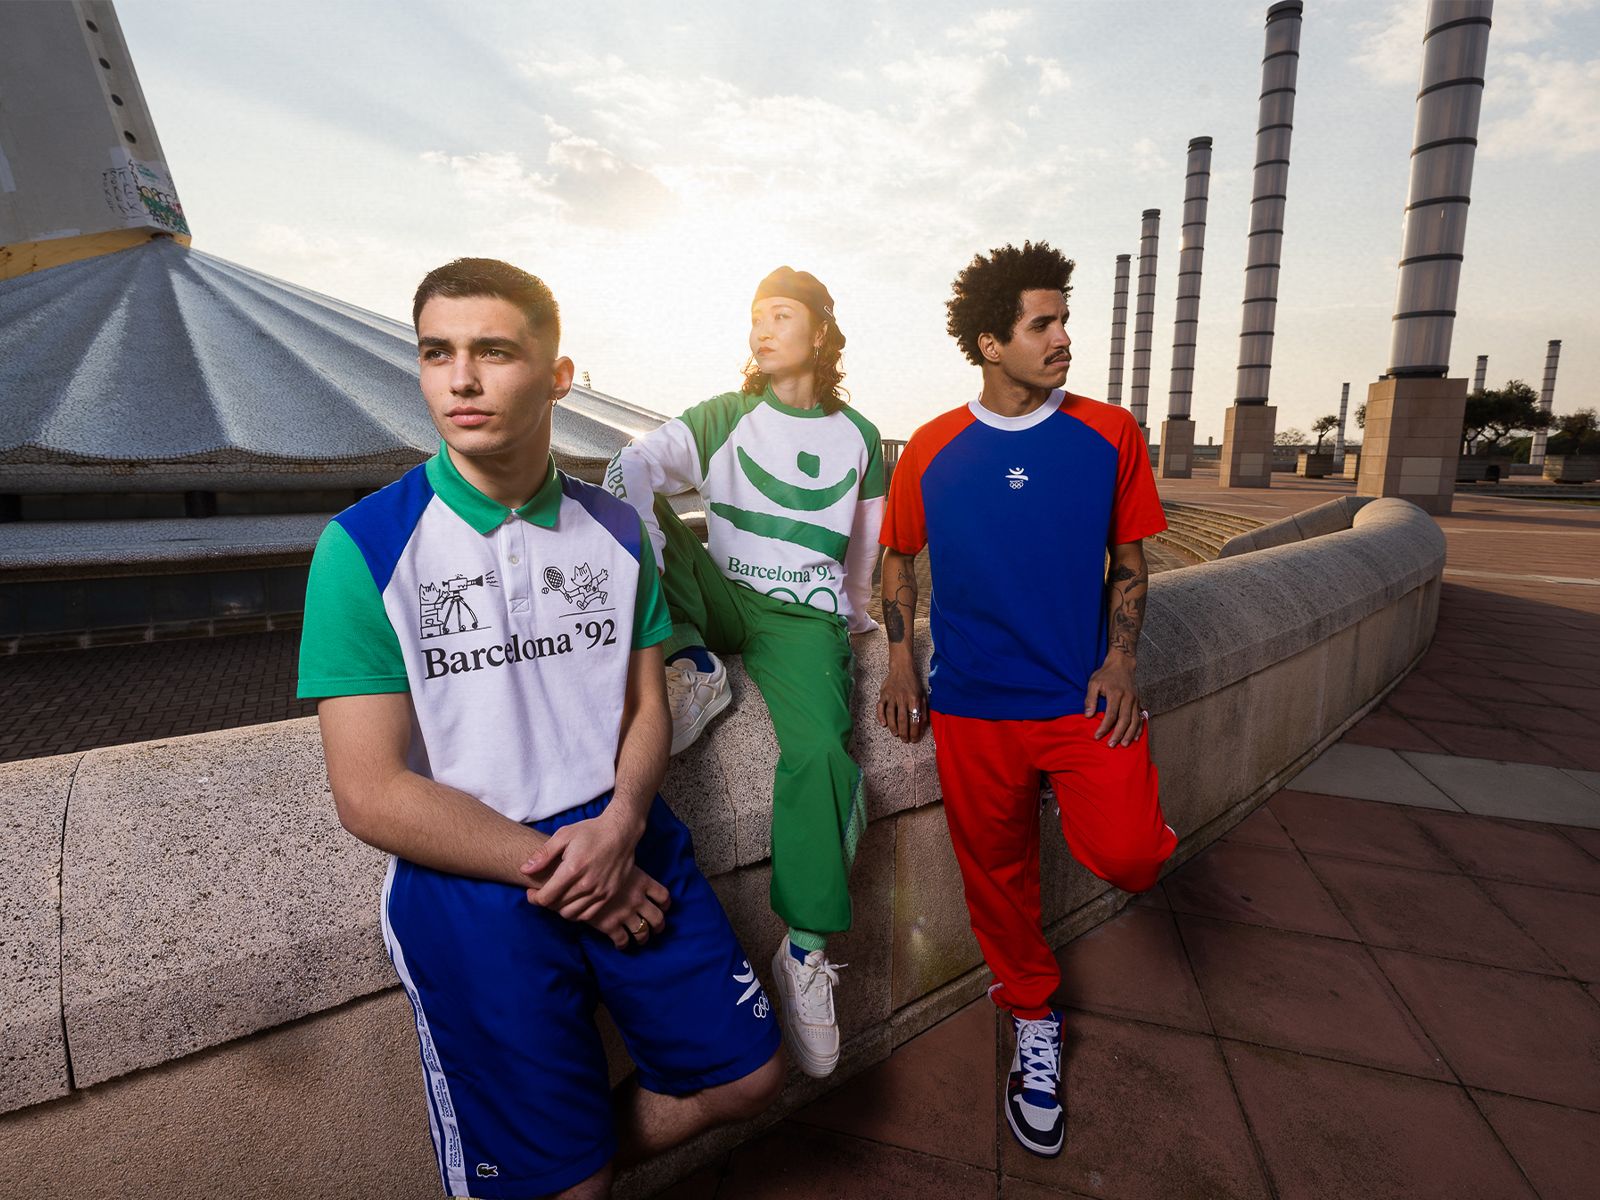 Lacoste pays tribute to the 1992 Barcelona Olympics with its ‘Olympic Heritage’ collection